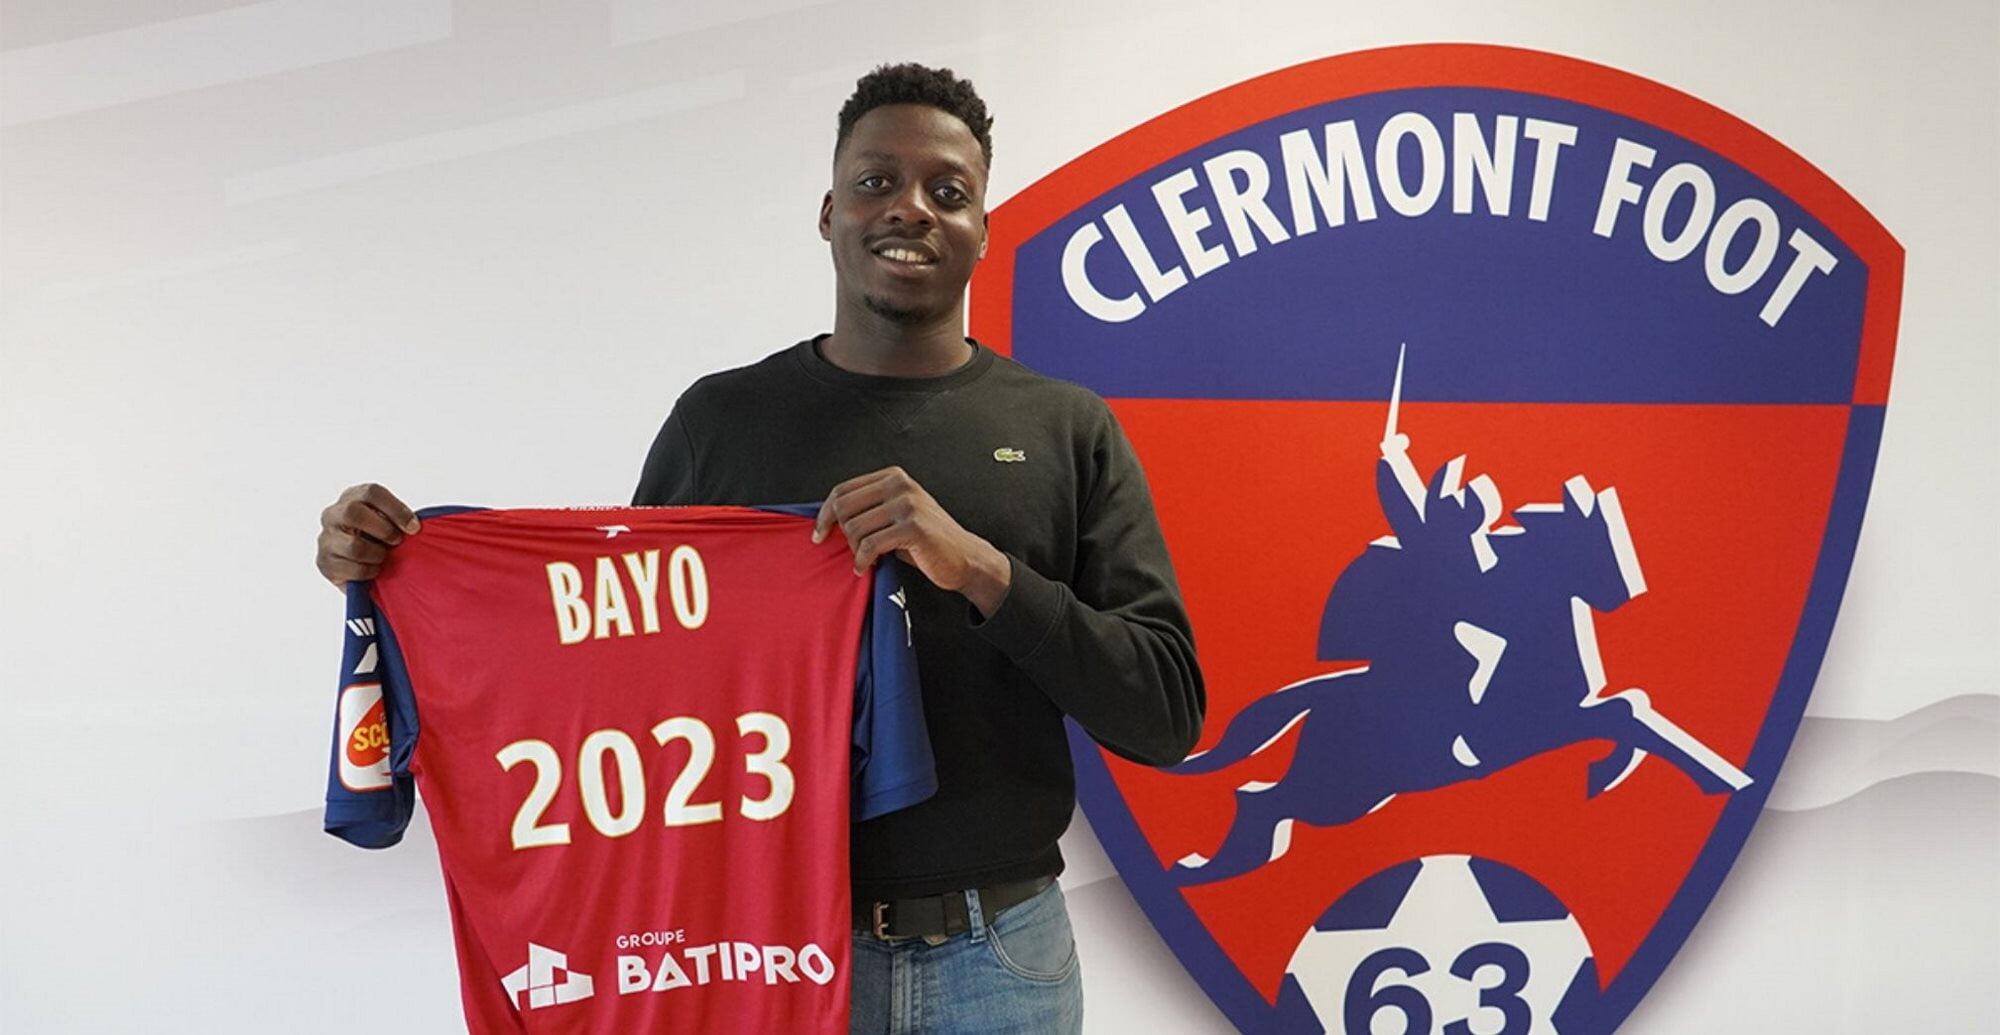 Mohamed Bayo (Clermont Foot 63)